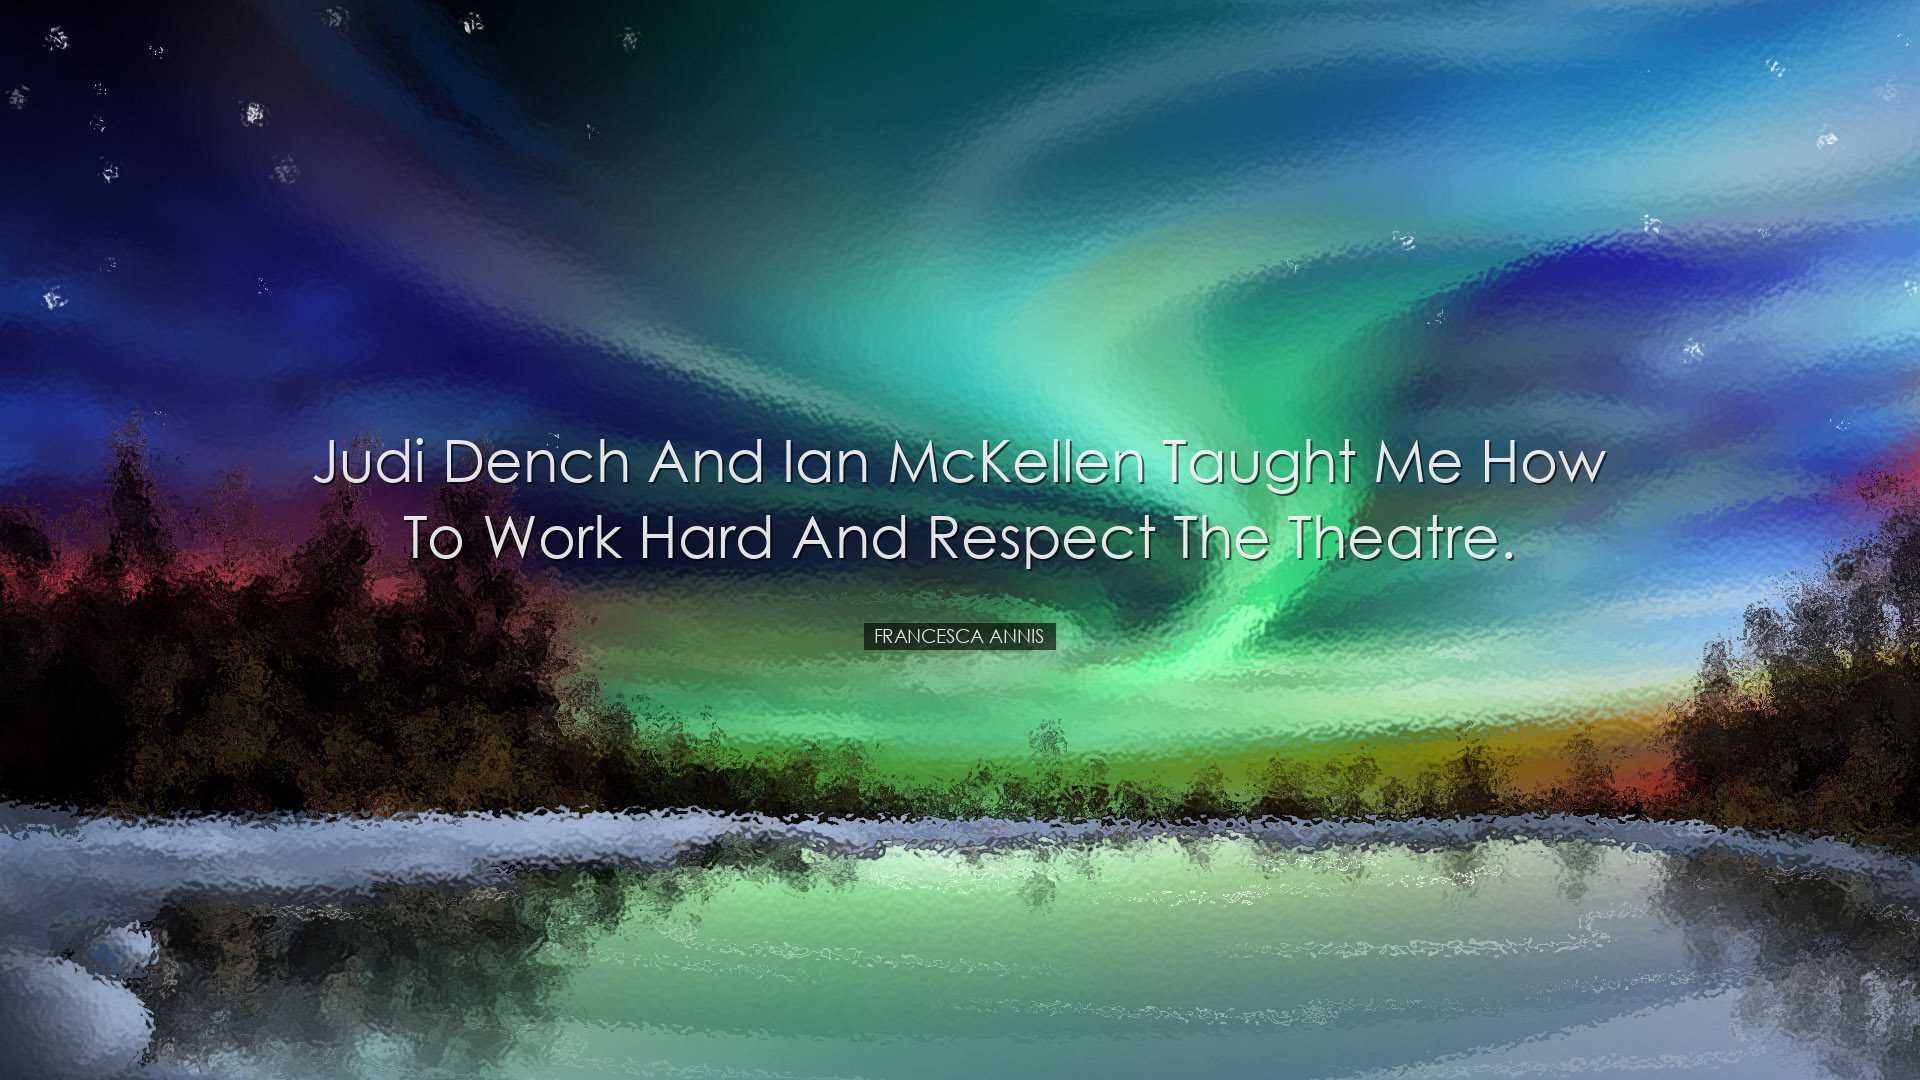 Judi Dench and Ian McKellen taught me how to work hard and respect